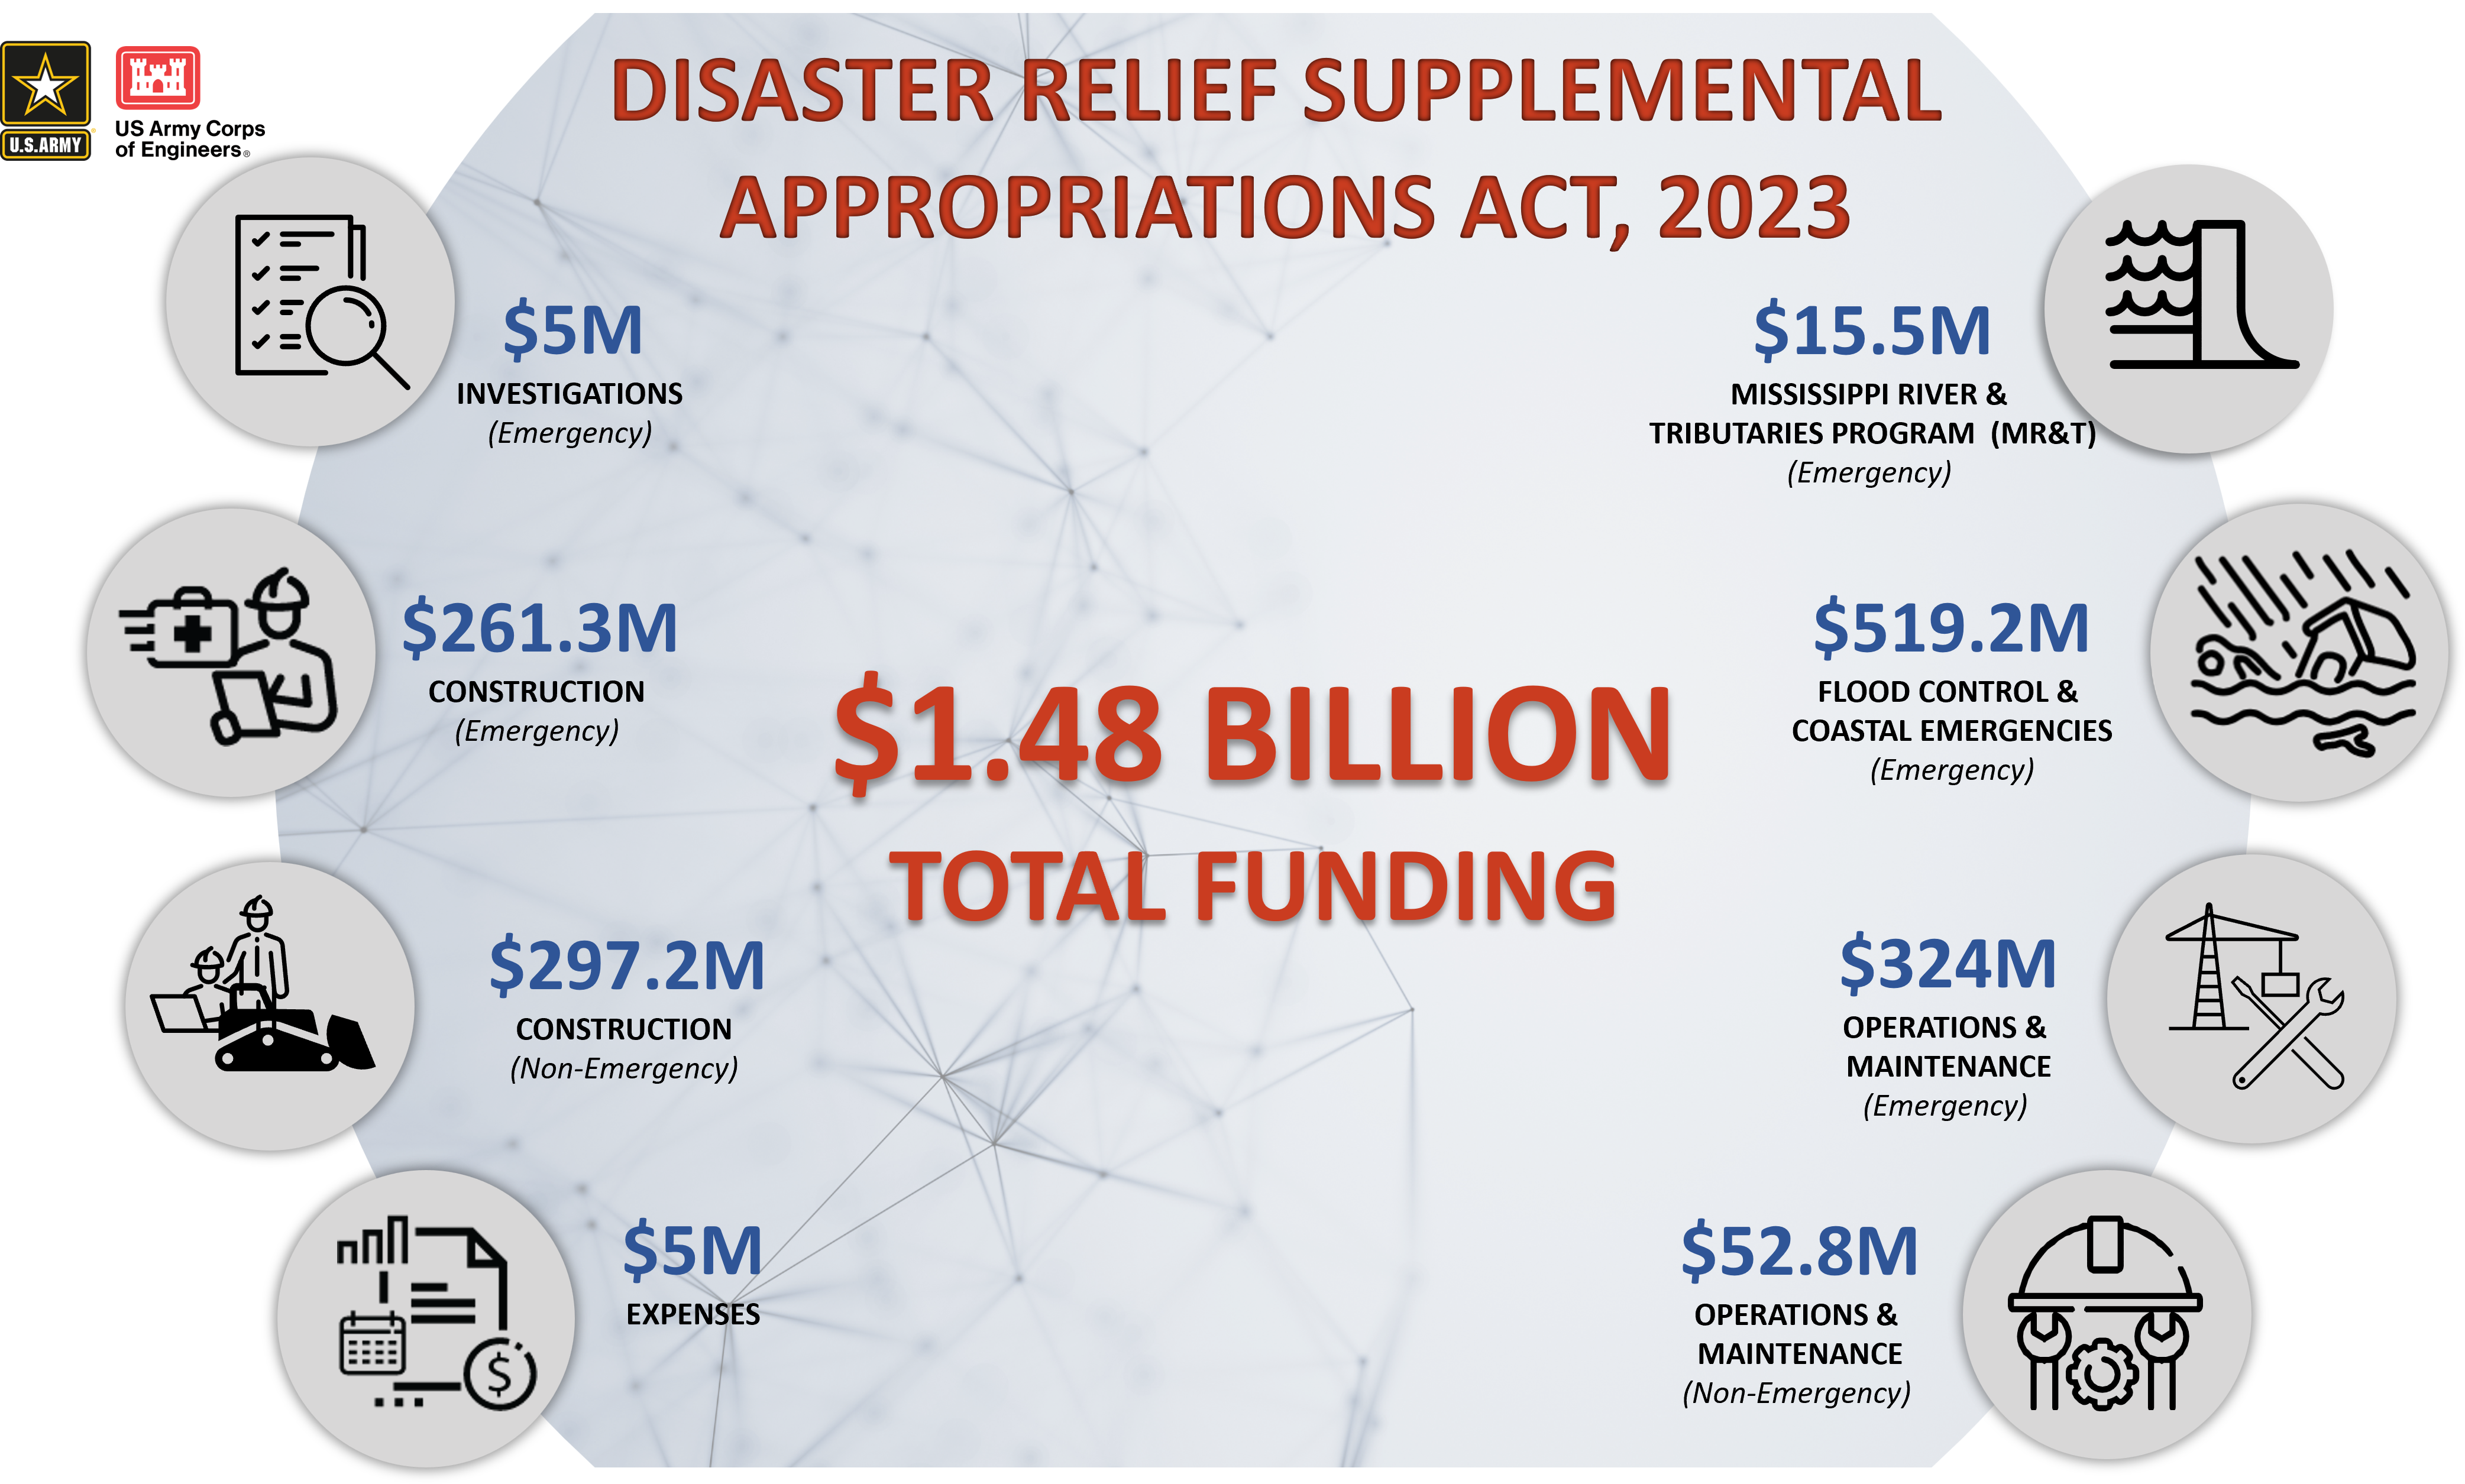 Disaster Relief Supplemental Appropriations Act of 2023 Info Graphic